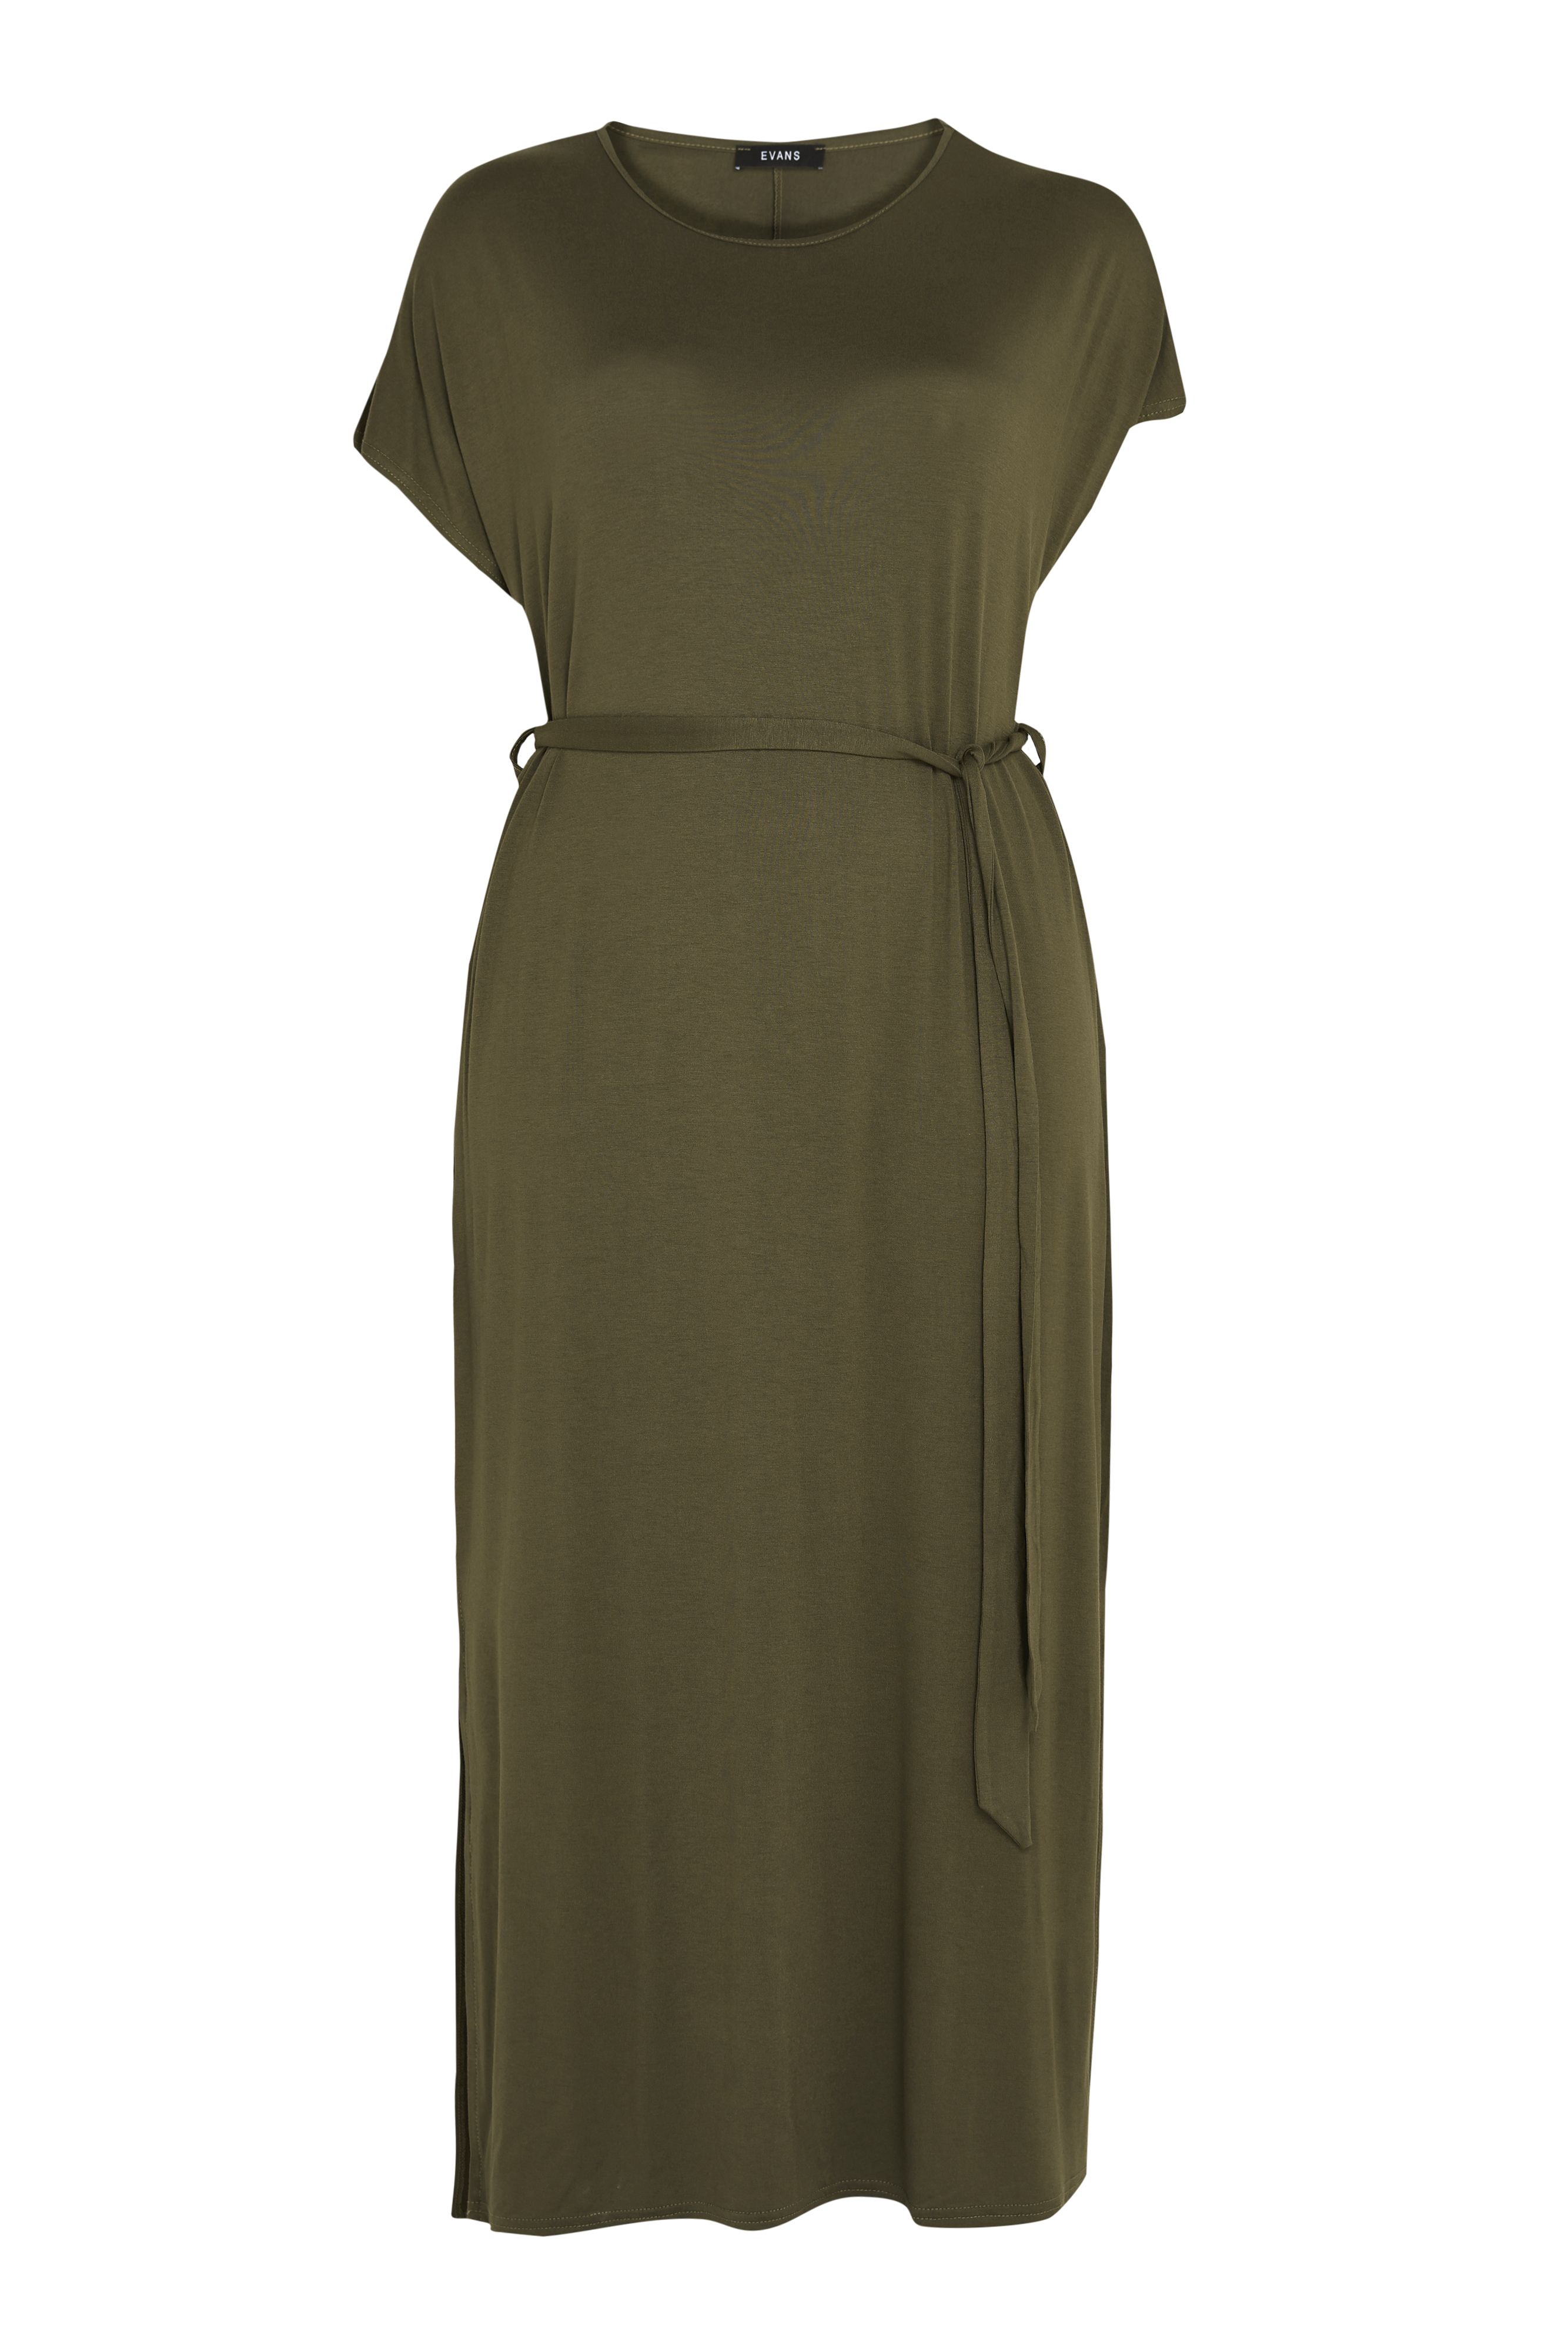 Perfect your off-duty style in the oh-so-comfortable Maxi T-Shirt Dress. Flaunting a tie waist and classic t-shirt silhouette, this casual dress is a must-have in every woman's wardrobe. Key Features Include: - Crew neckline - Short sleeves - Tie waist - Relaxed fit - Maxi length hemline with side split